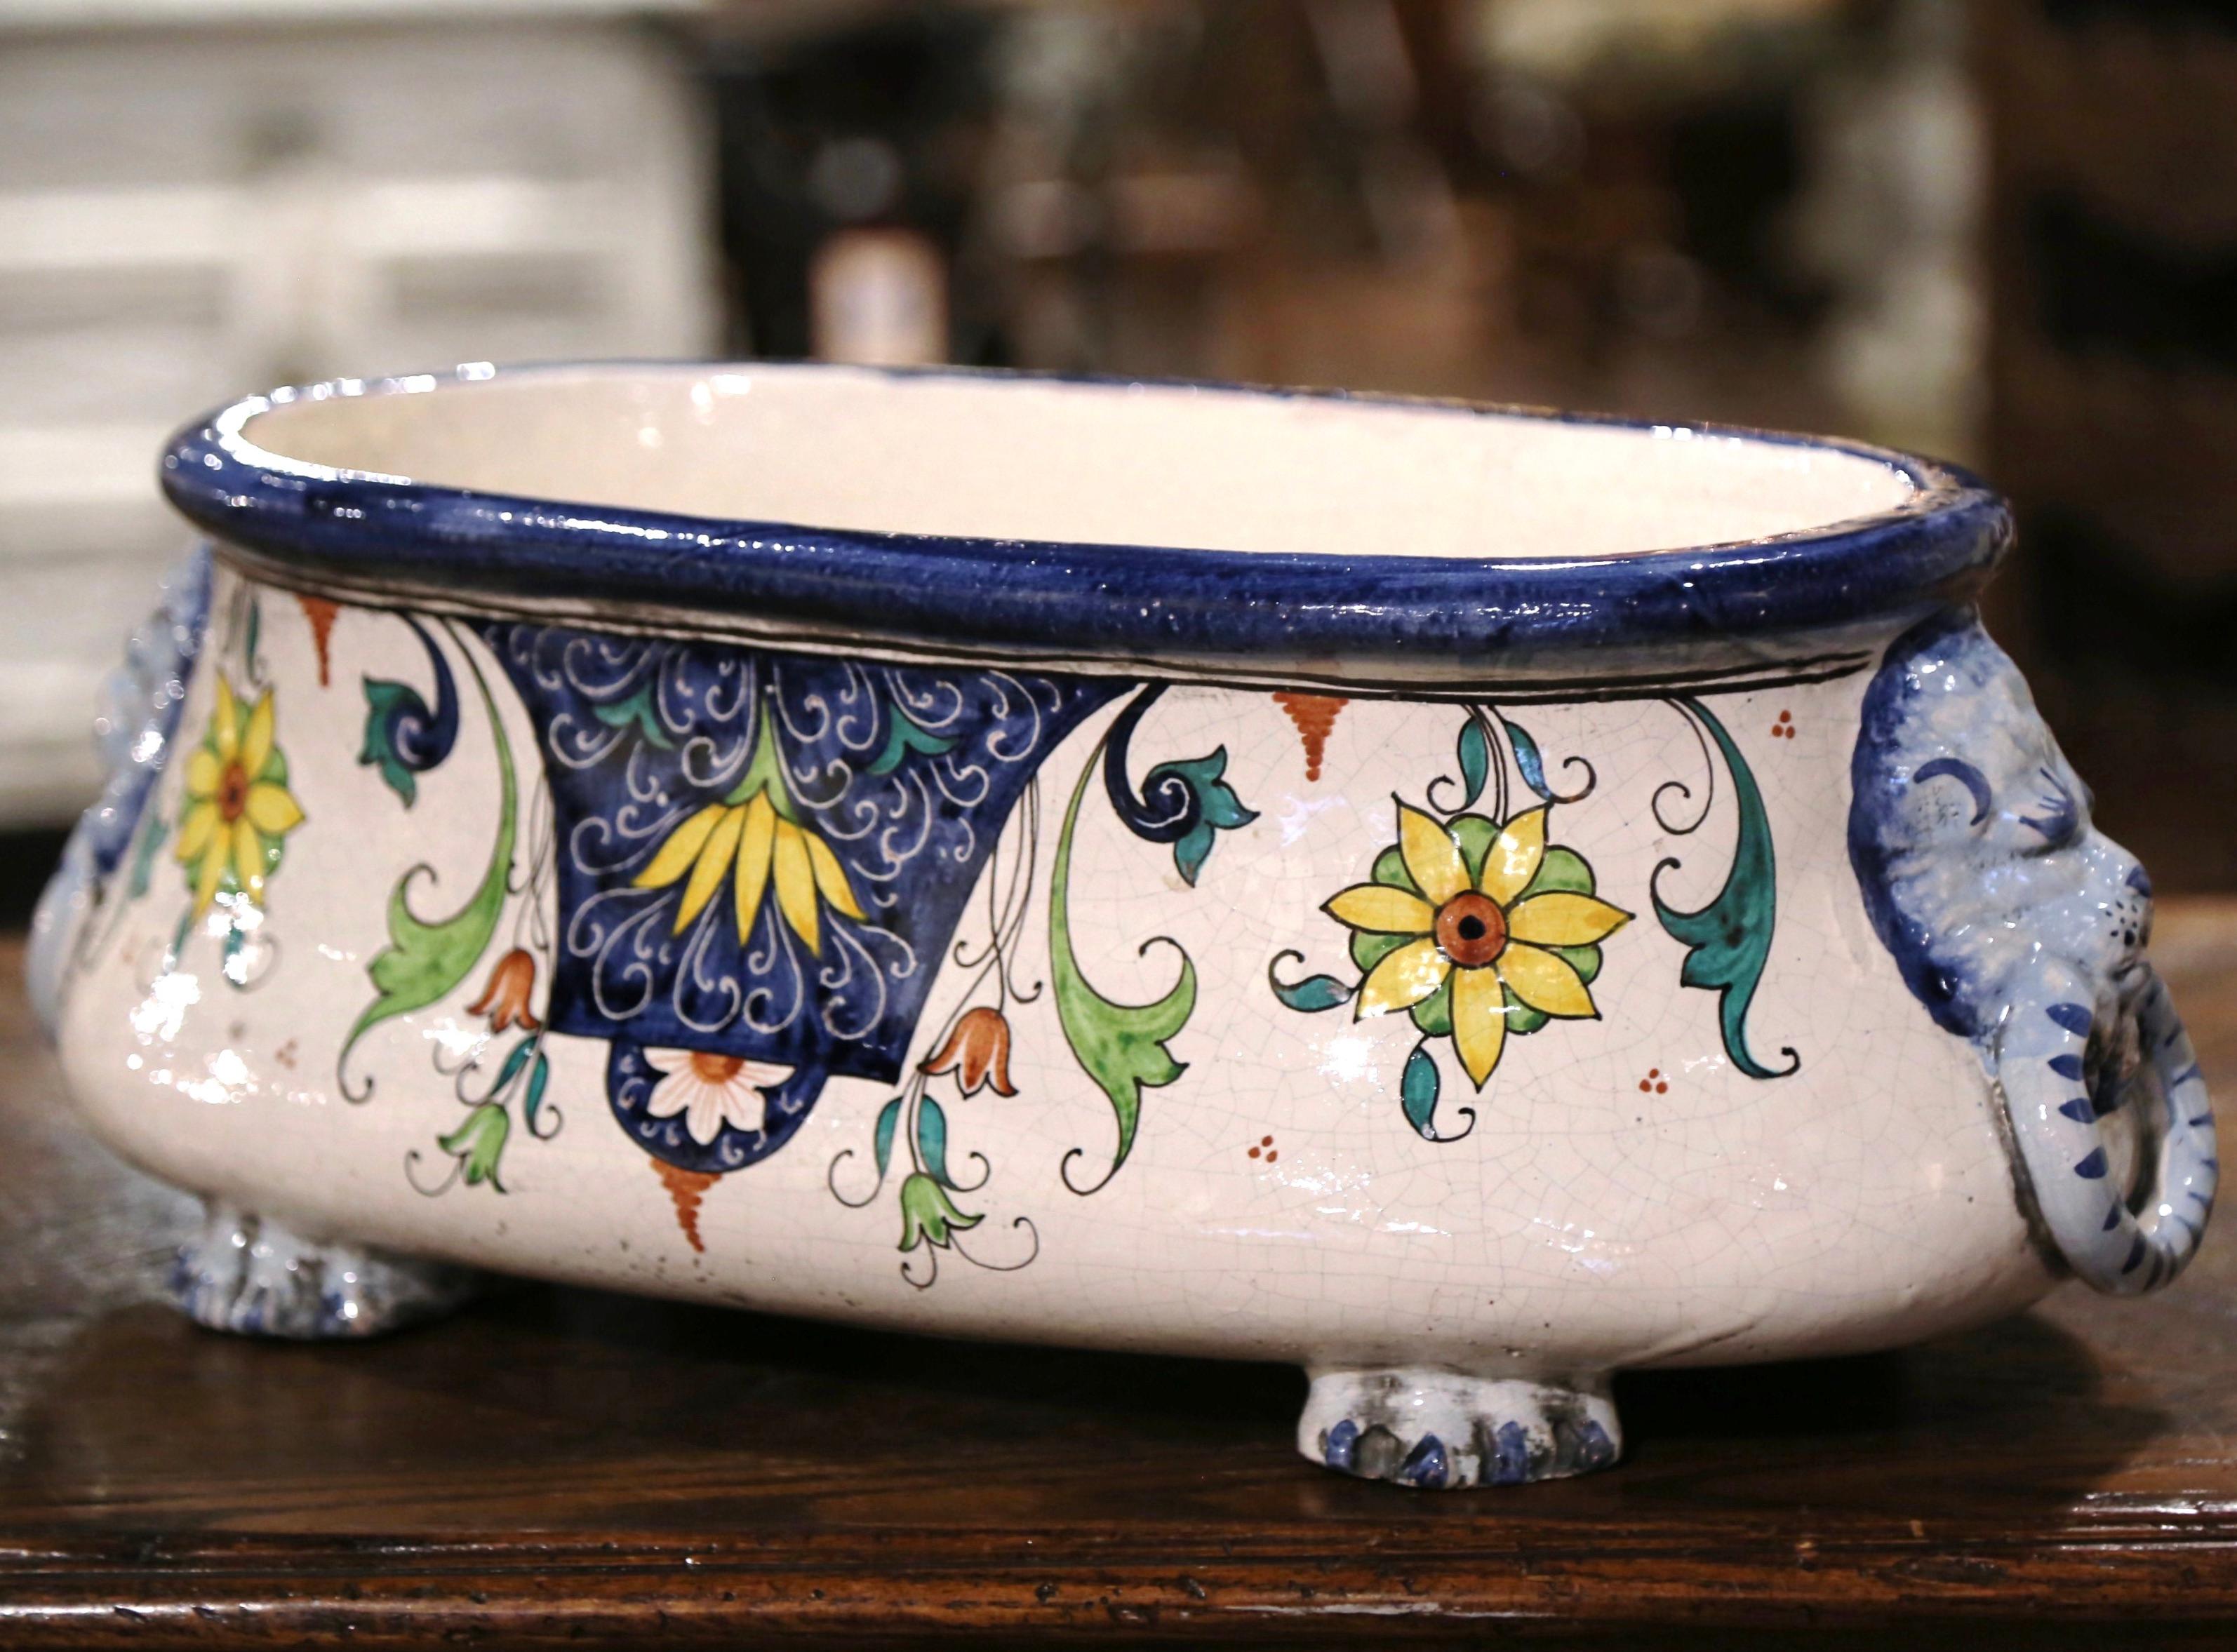 Decorate a buffet or dining table with this colorful ceramic cache pot. Crafted in France, circa 1920 and oval in shape, the jardinière stands on four paw feet and is dressed with lion head form handles. The faience planter is decorated with hand